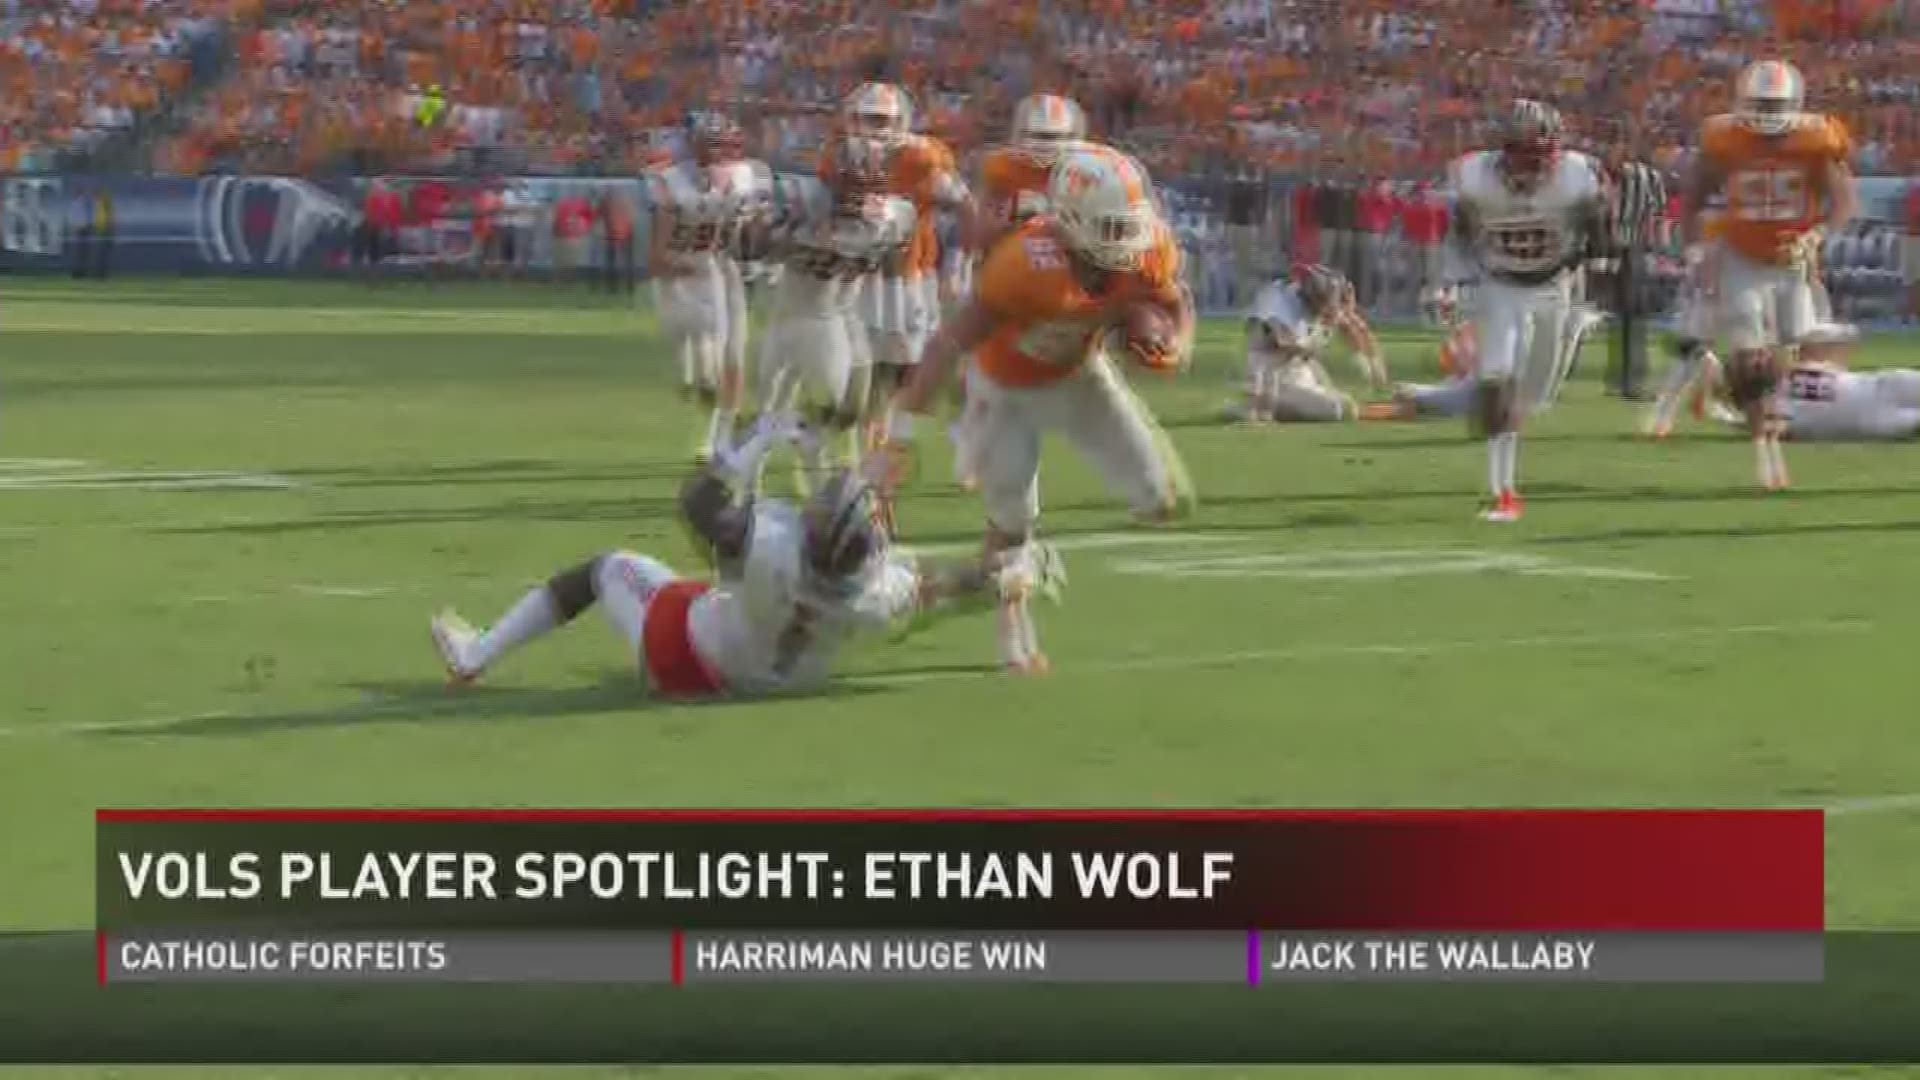 Getting to know Ethan Wolf off the field, plus analysis on the Vols' tight end from Wes Rucker.